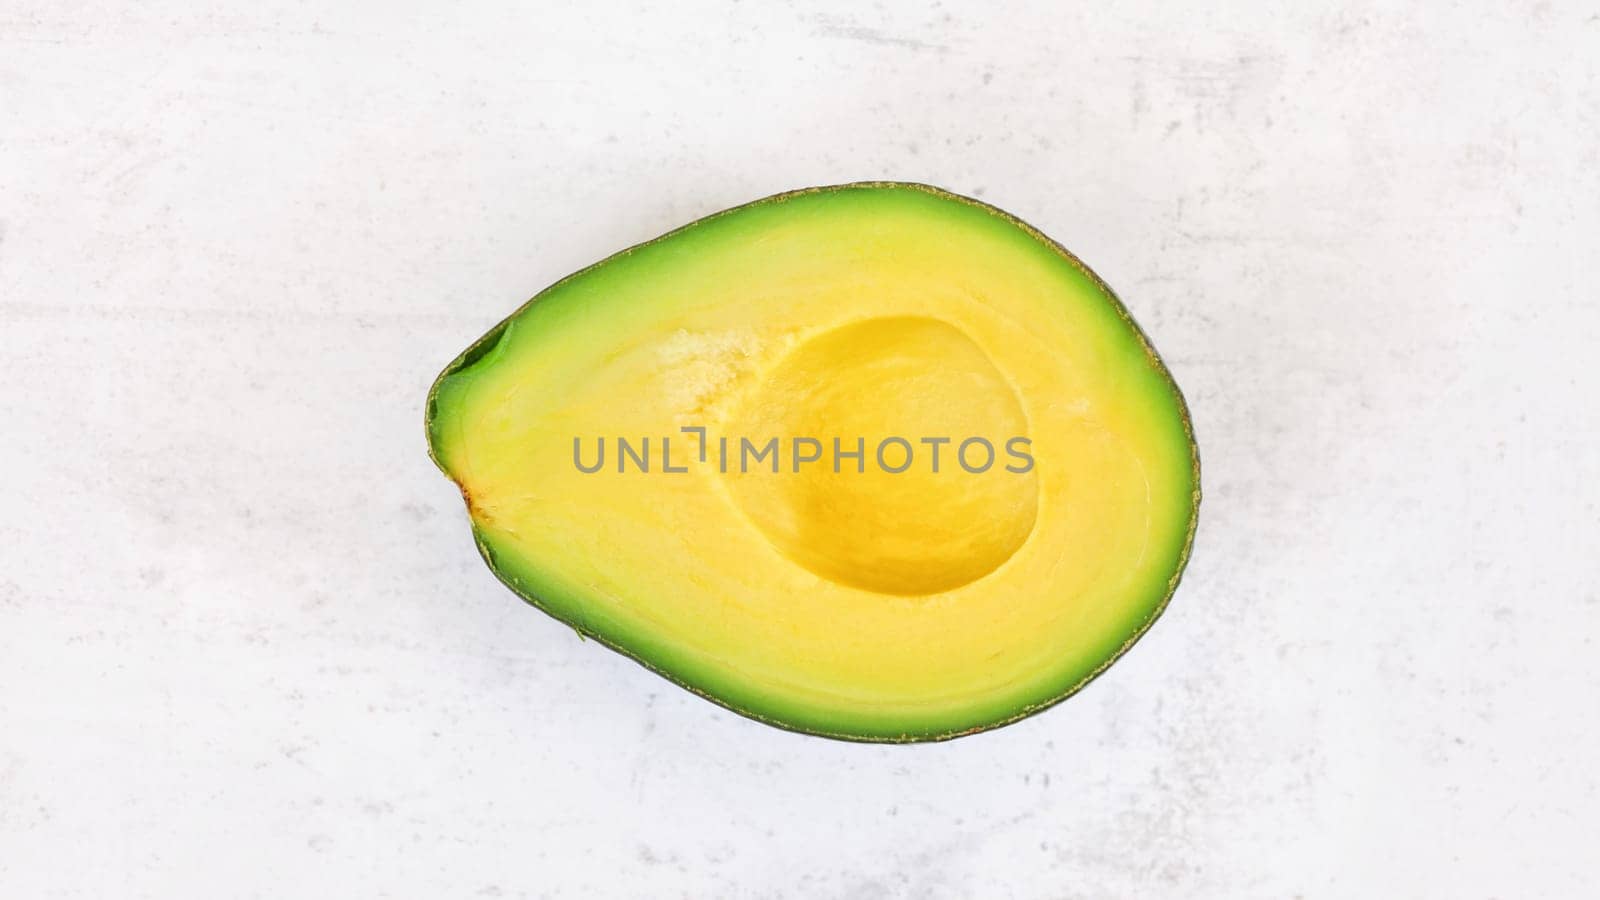 Avocado half, with bright yellow pulp on white stone board, photo from above by Ivanko